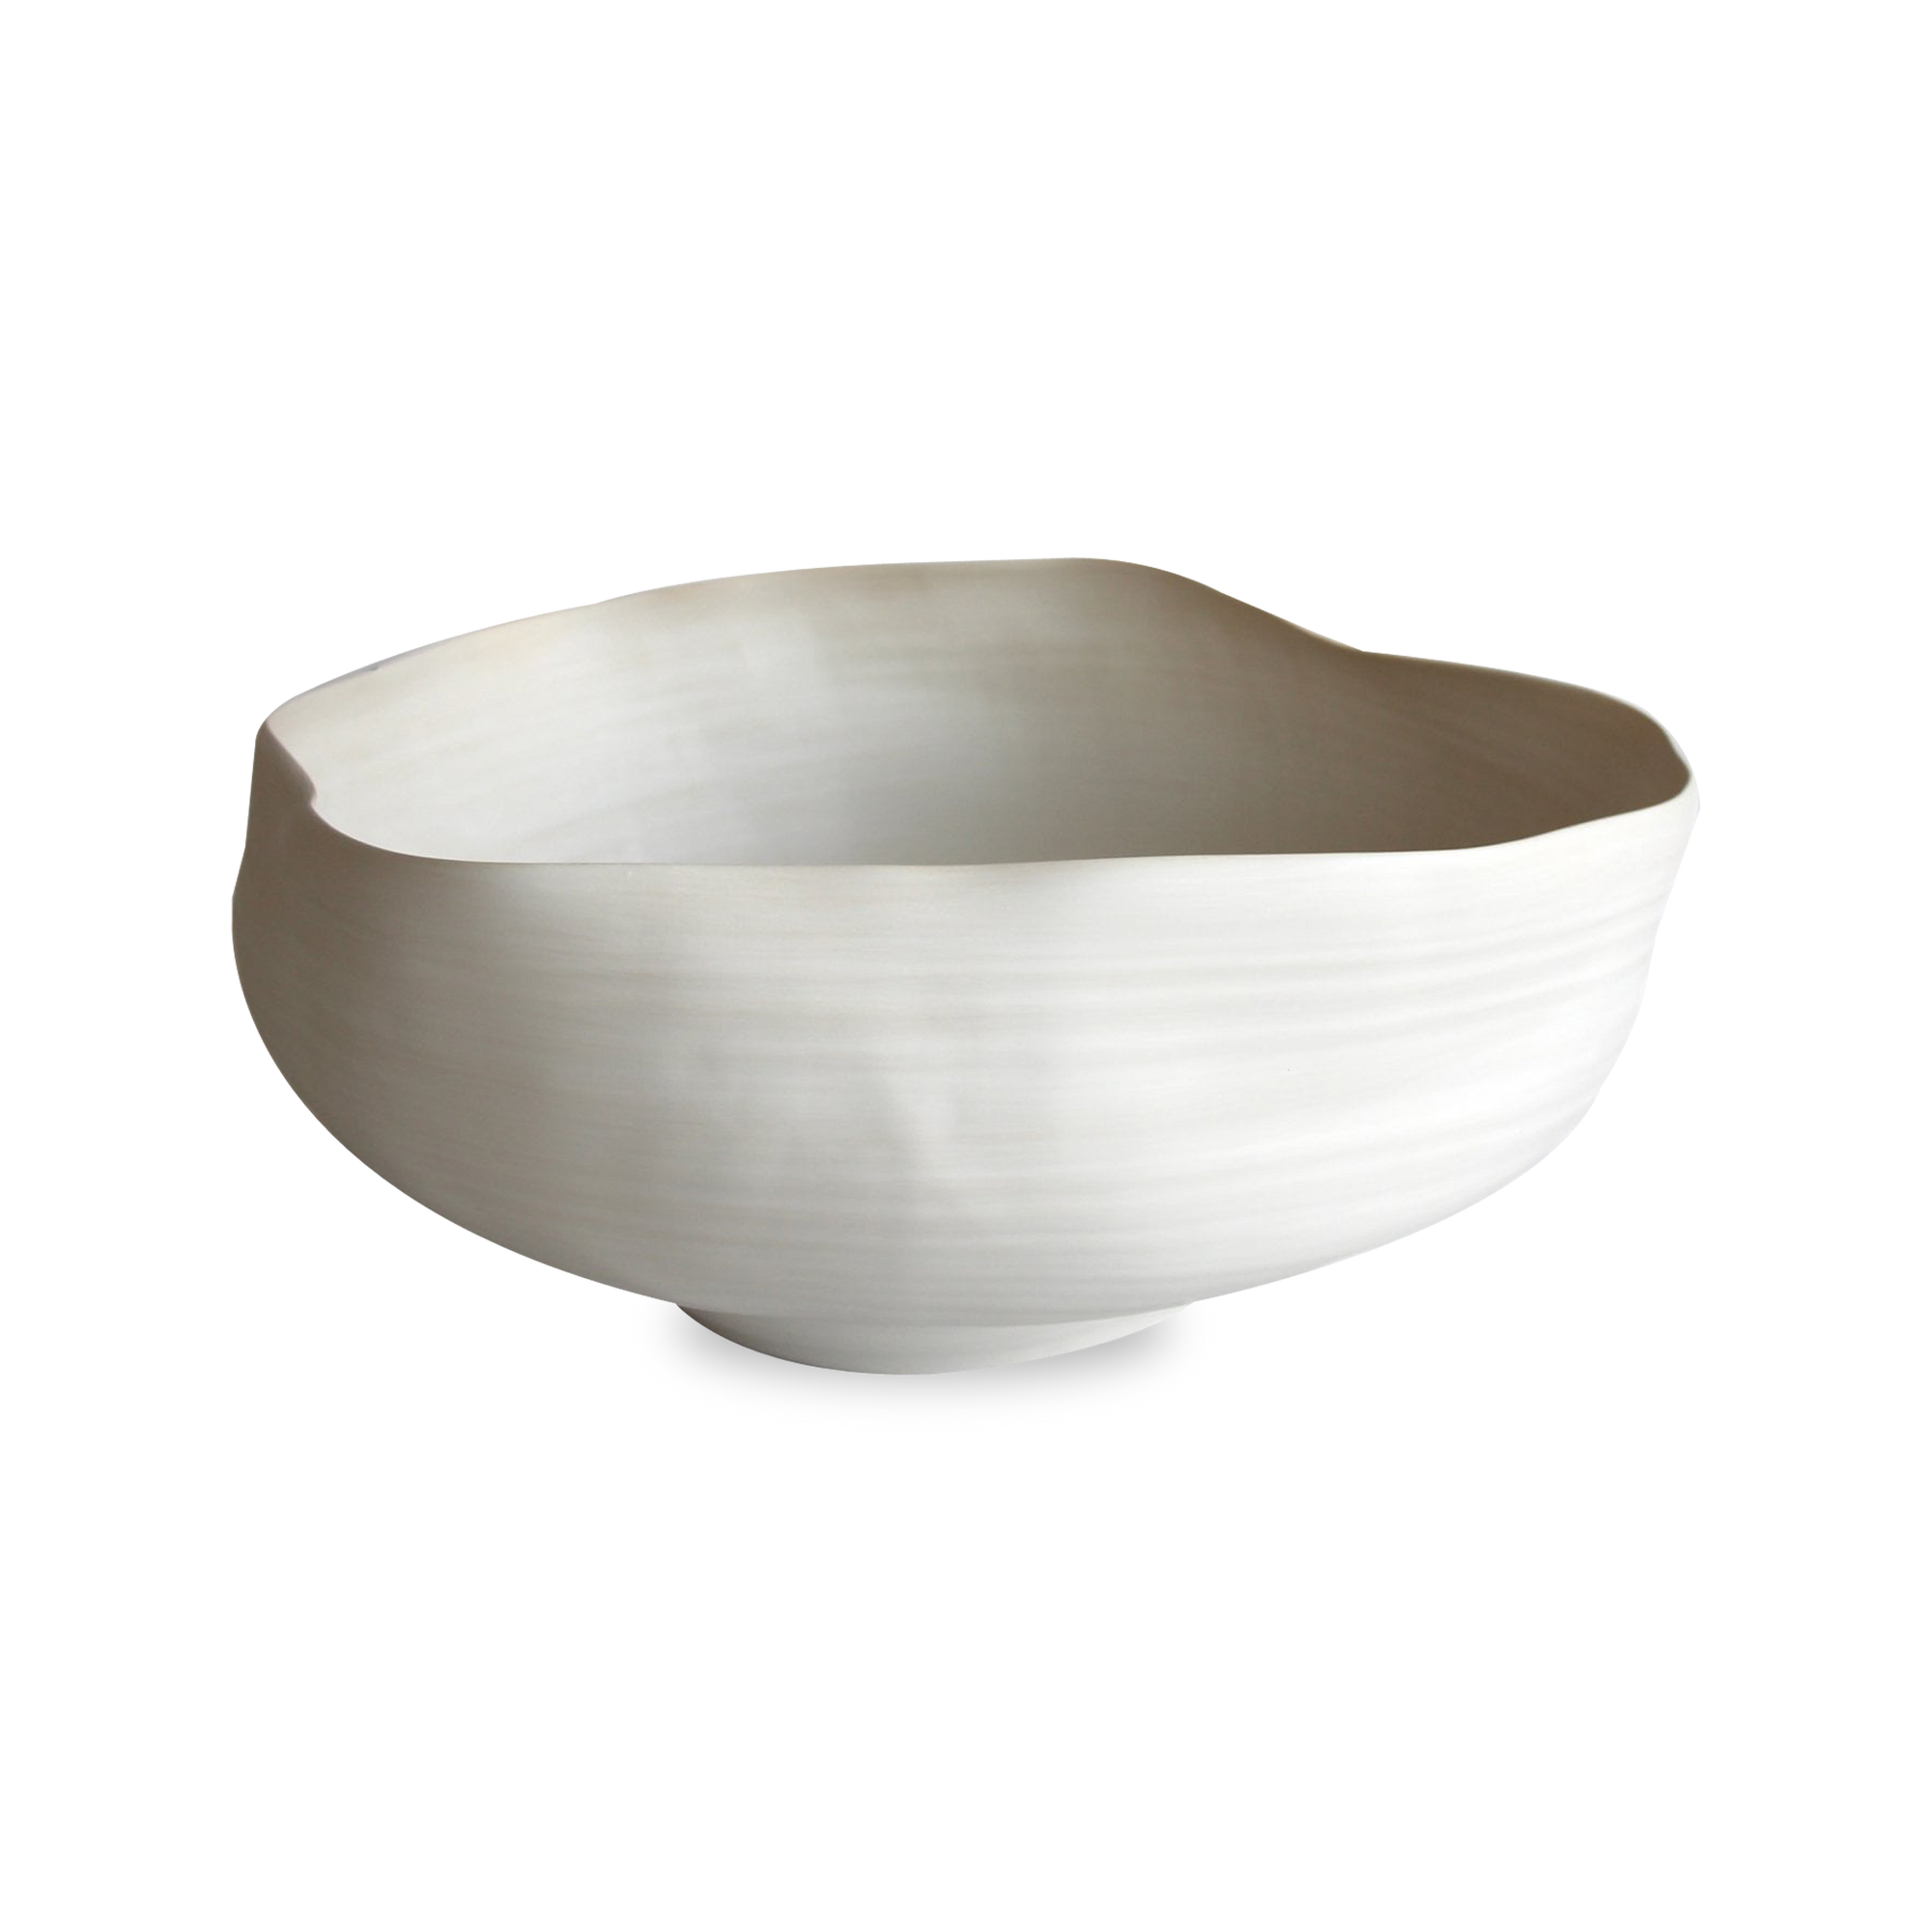 The Fonte Bowl is completely handmade in Italy and is characterized by simple lines, organic colours and shapes inspired by nature.